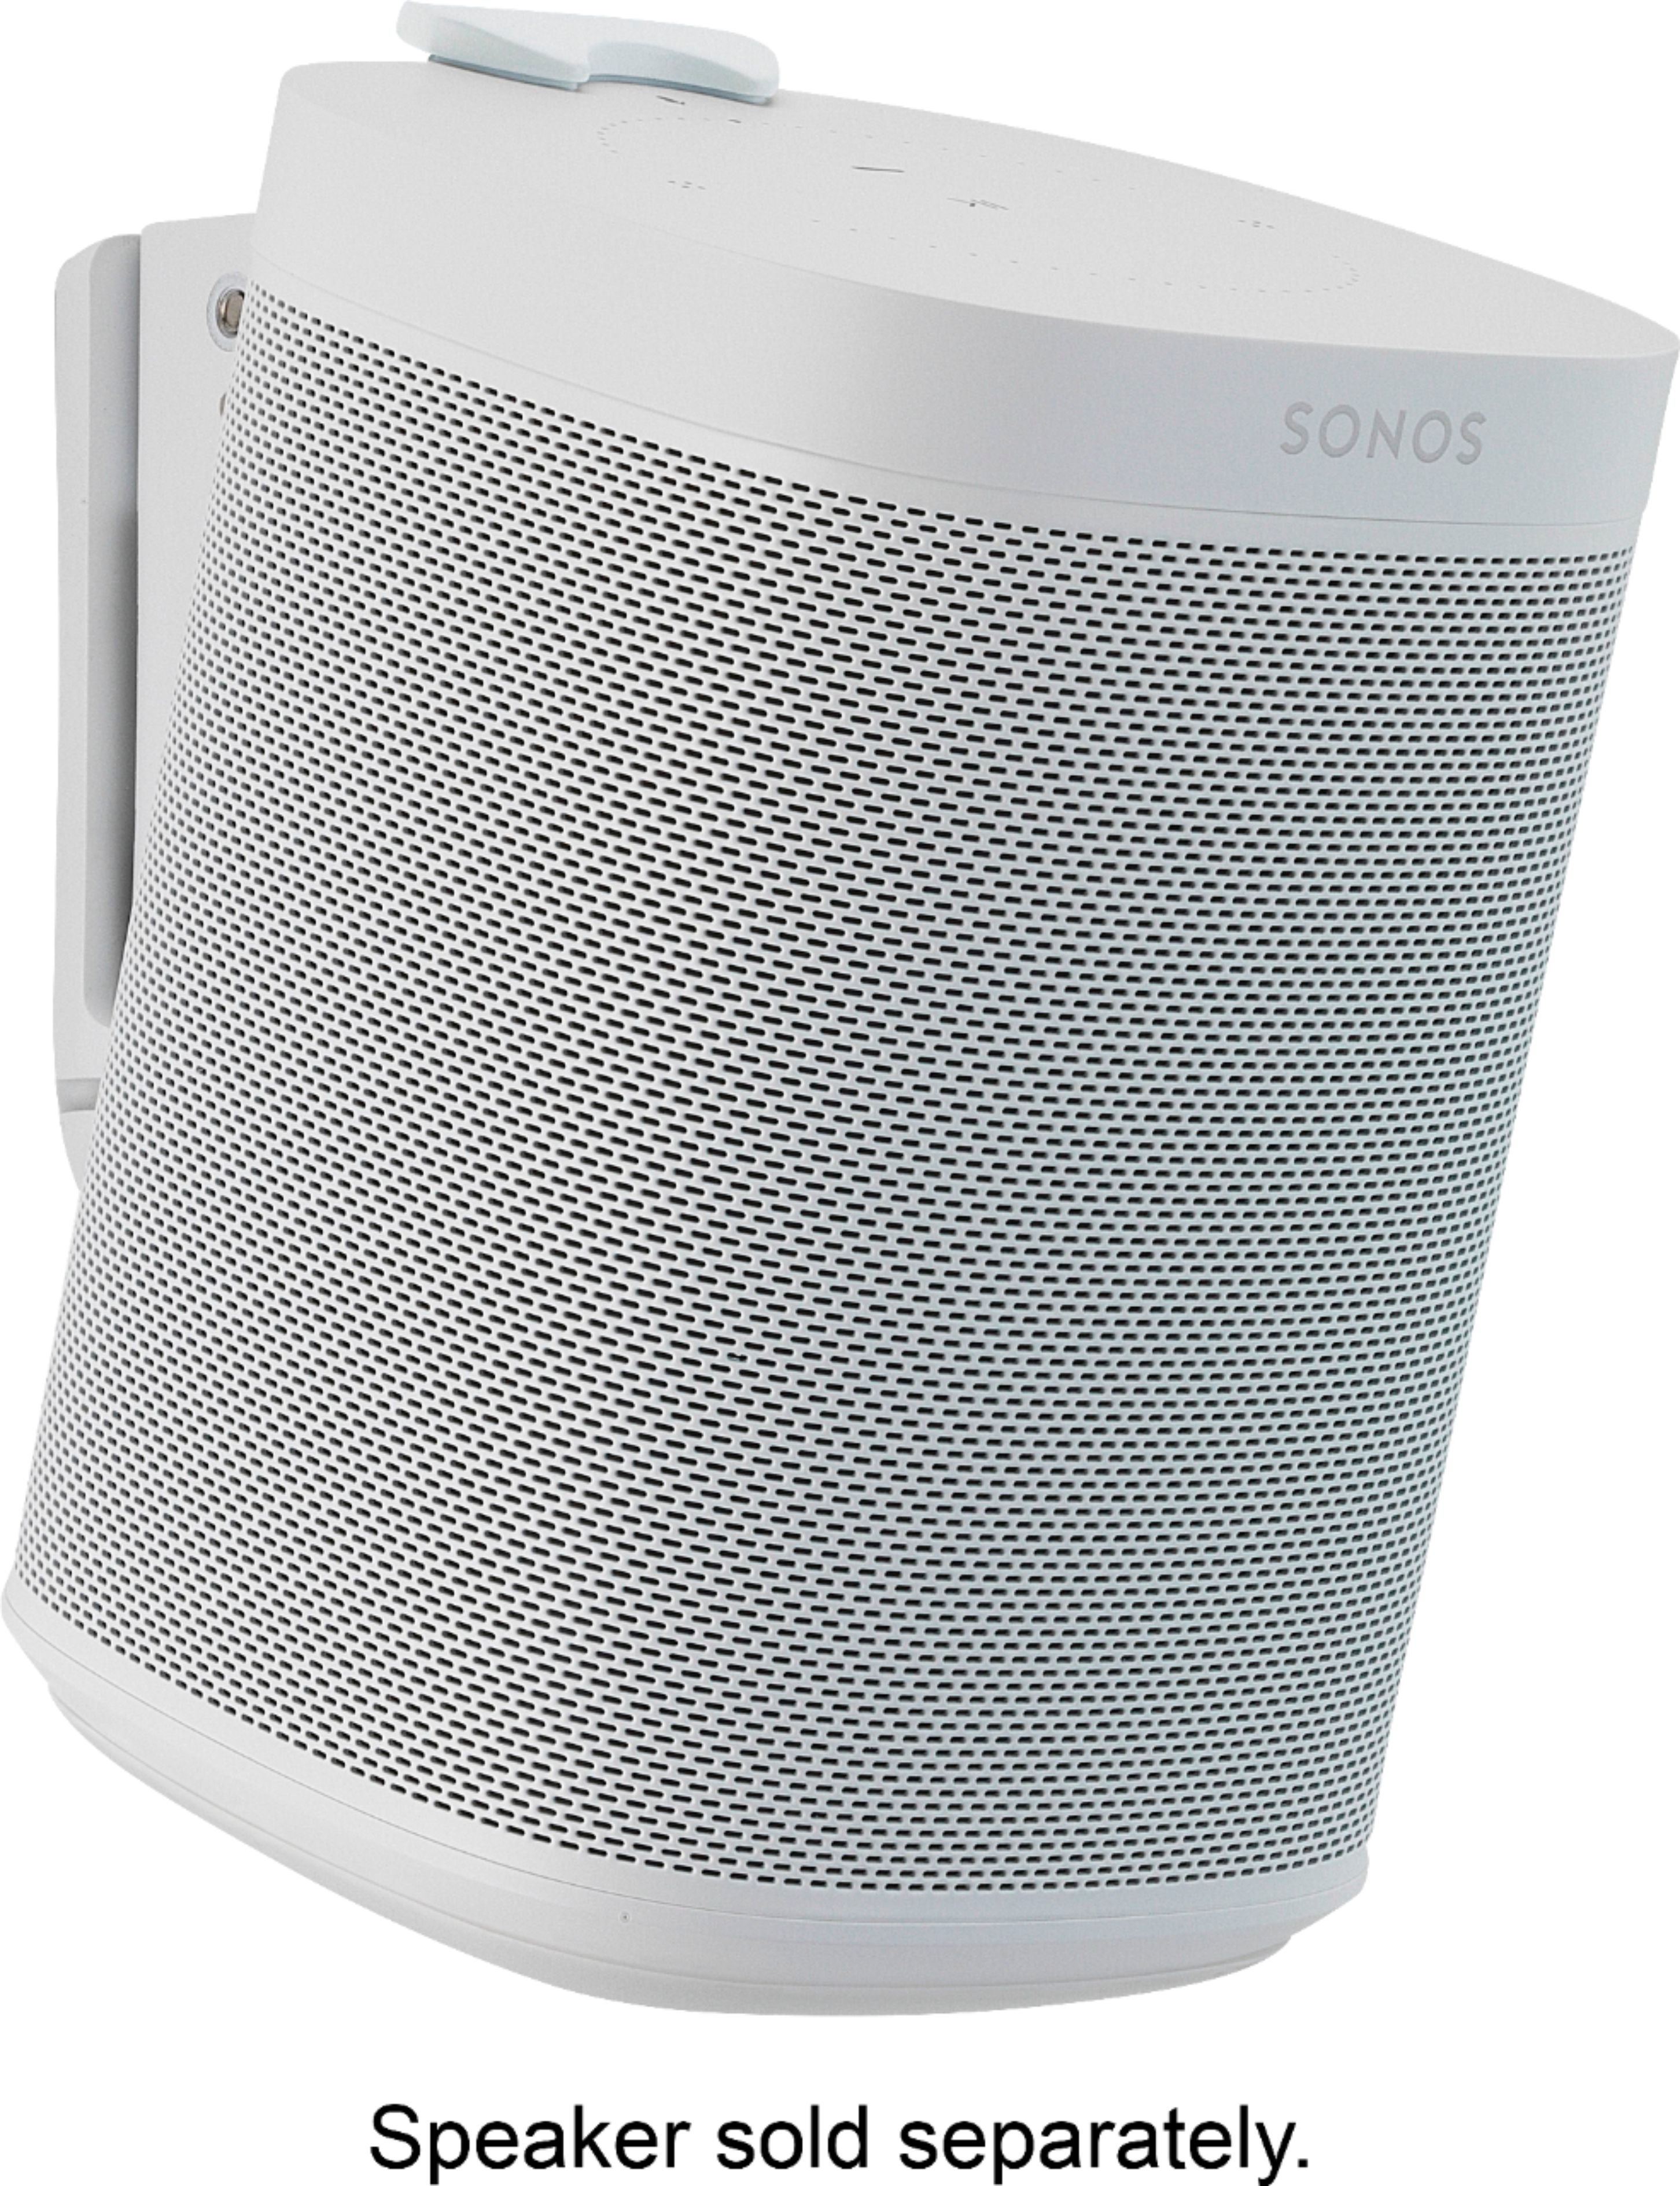 Angle View: Flexson - Wall Mount for Sonos One, One SL, and Play:1 - White